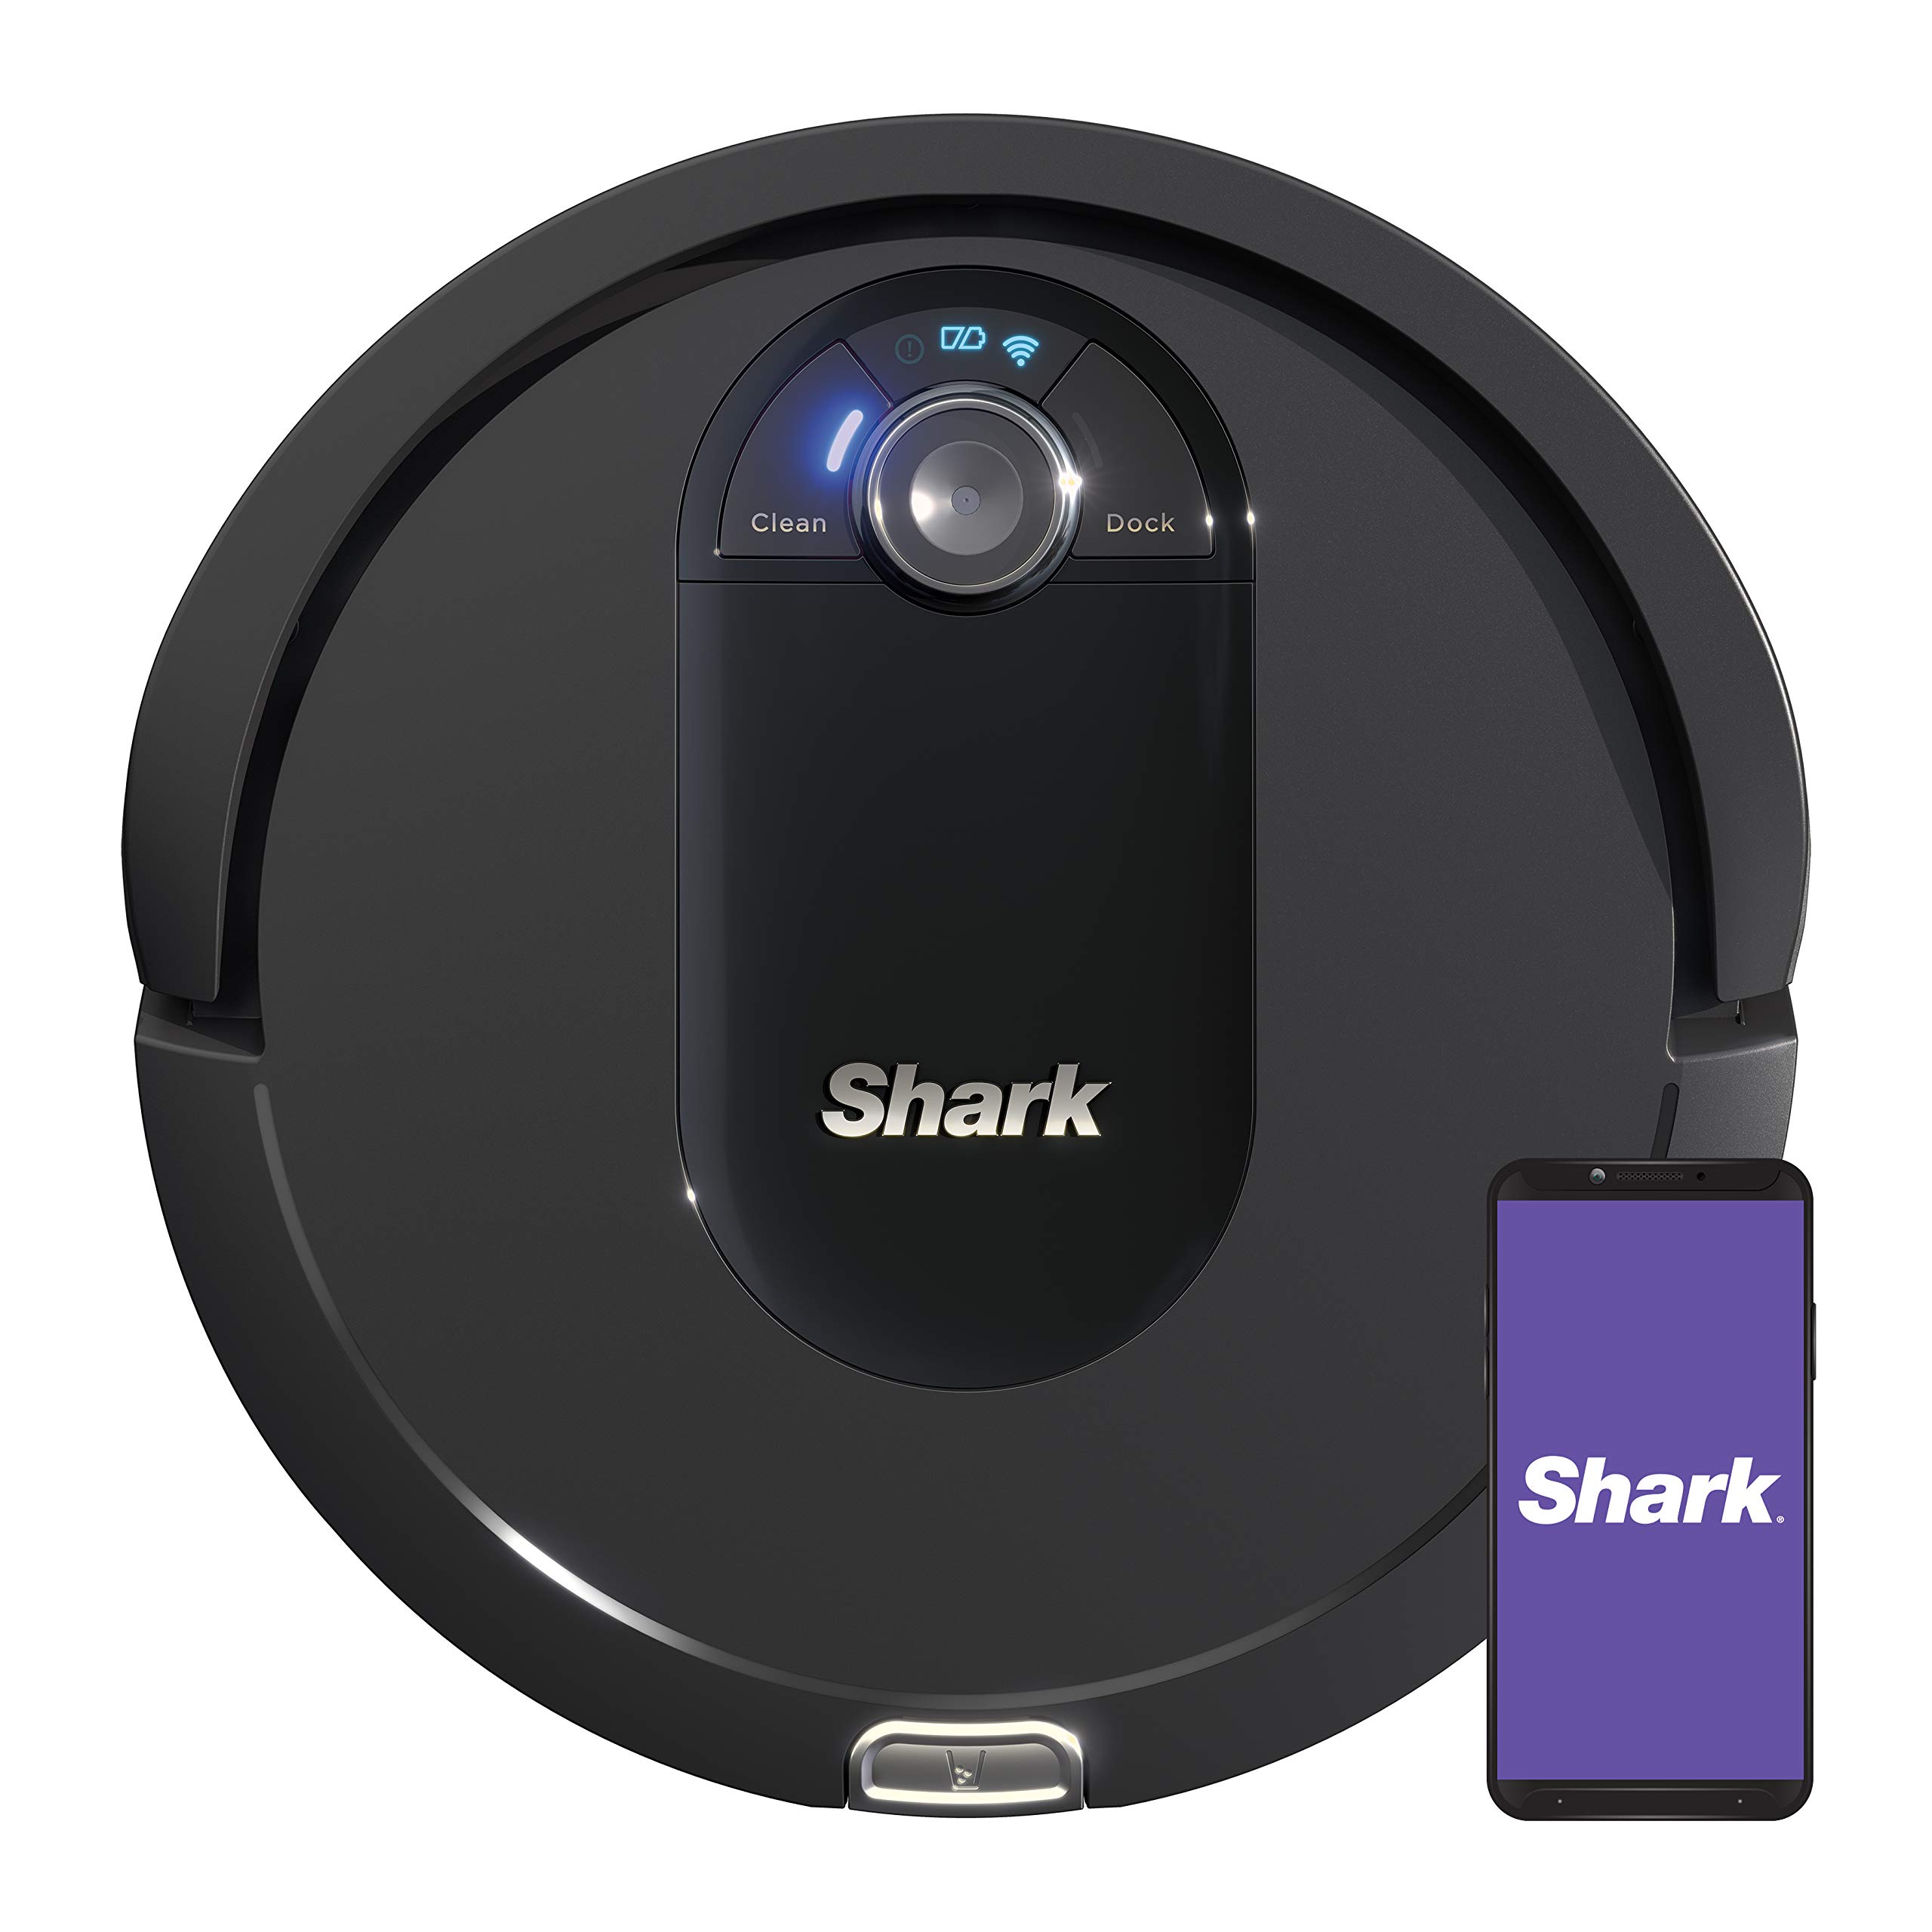 Shark AV993 IQ Robot Vacuum, Self Cleaning Brushroll, Advanced Navigation, Perfect for Pet Hair, Compatible with Alexa, Wi Fi , Black, List Price is $299.99, Now Only $199.99